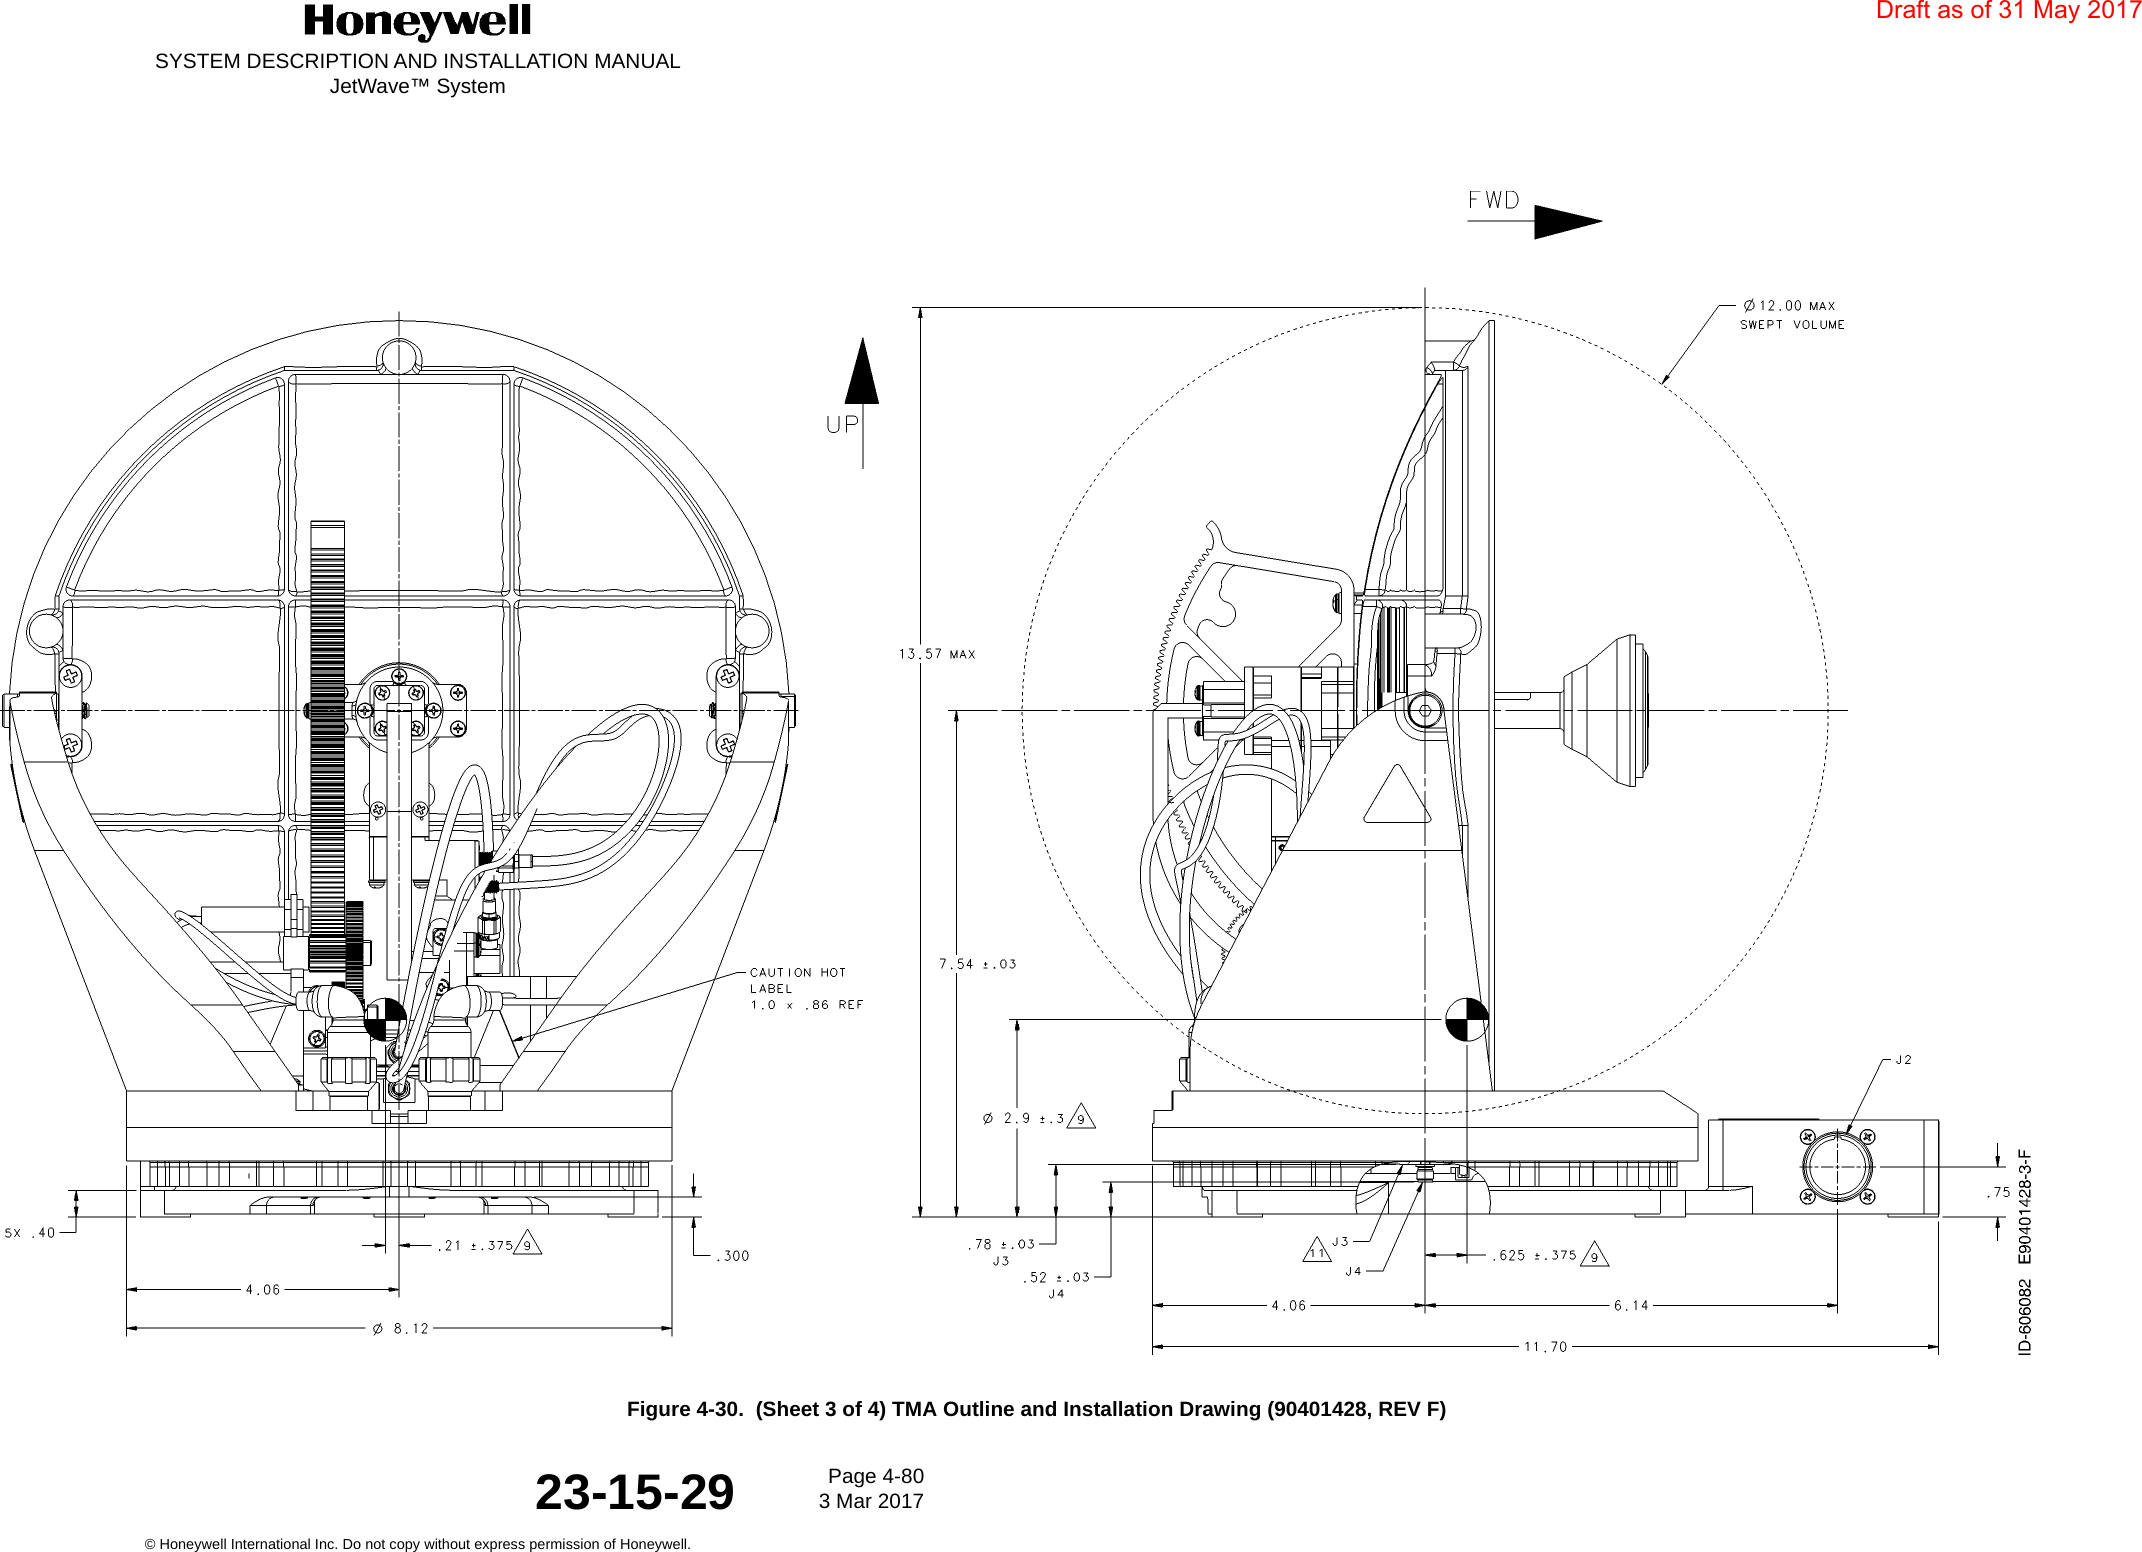 SYSTEM DESCRIPTION AND INSTALLATION MANUALJetWave™ SystemPage 4-80 3 Mar 2017© Honeywell International Inc. Do not copy without express permission of Honeywell.23-15-29Figure 4-30.  (Sheet 3 of 4) TMA Outline and Installation Drawing (90401428, REV F)Draft as of 31 May 2017